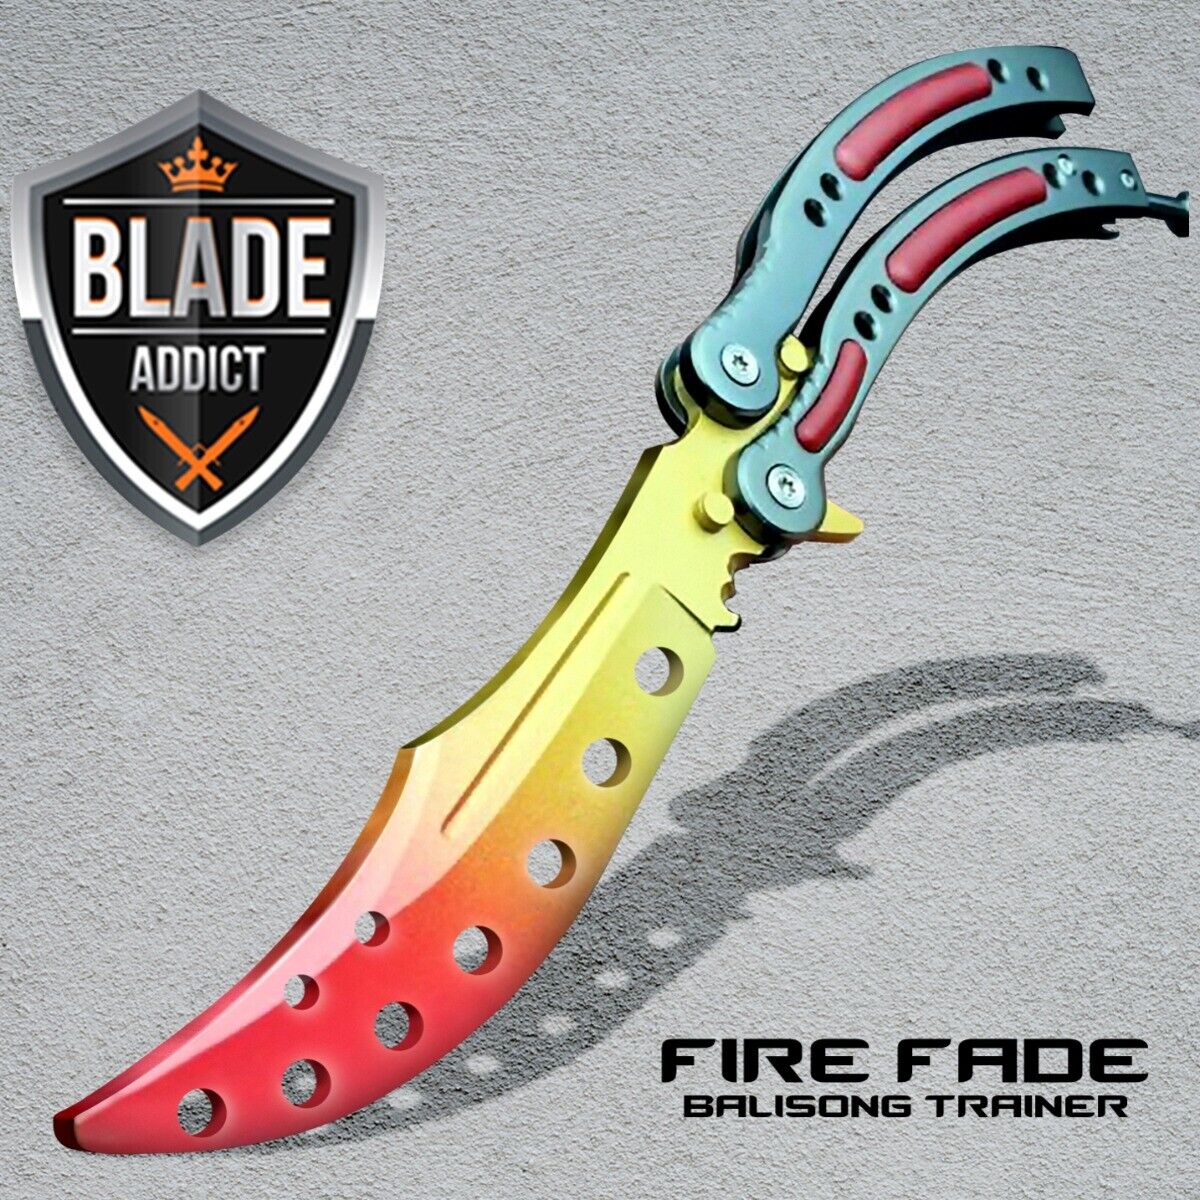 CSGO FIRE FADE Practice Knife Balisong Butterfly Tactical Combat Trainer NEW